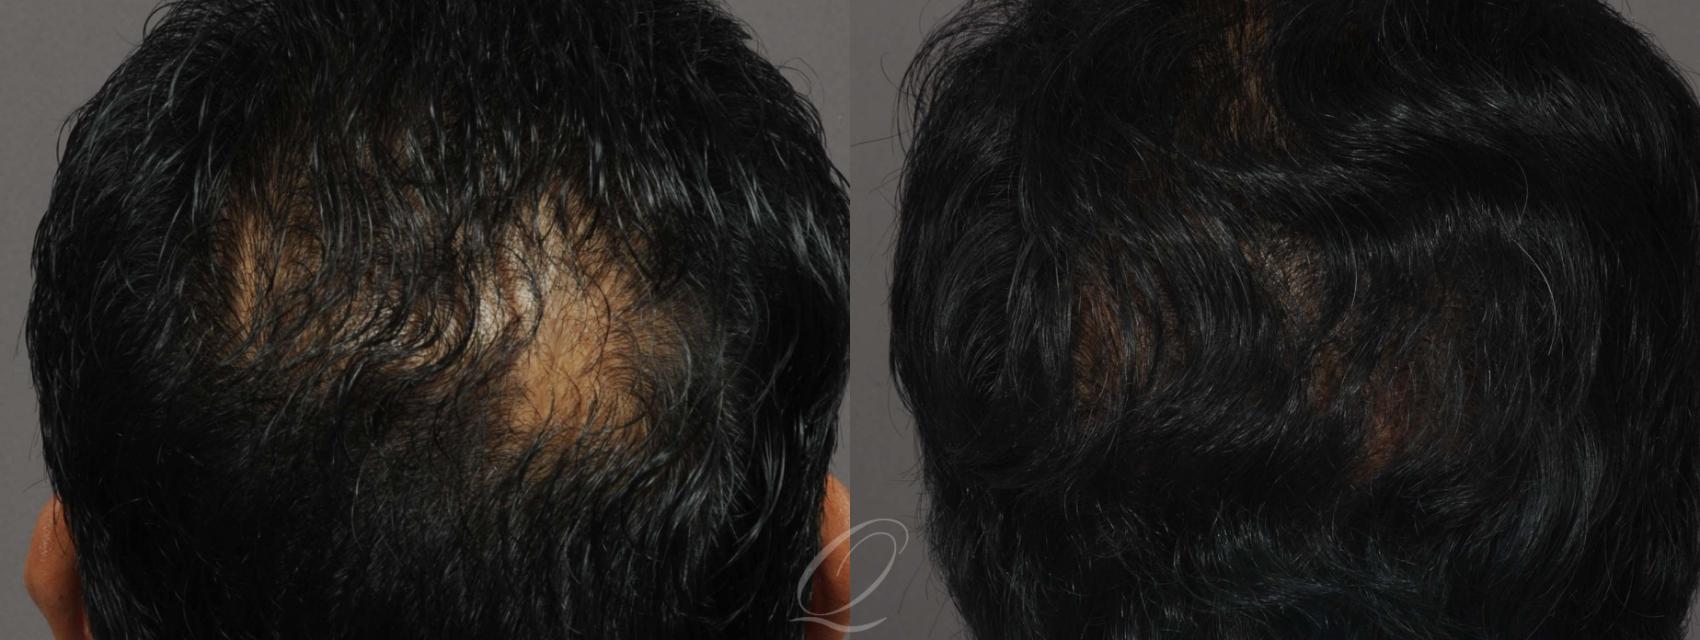 FUT Case 1014 Before & After View #2 | Rochester, Buffalo, & Syracuse, NY | Quatela Center for Hair Restoration